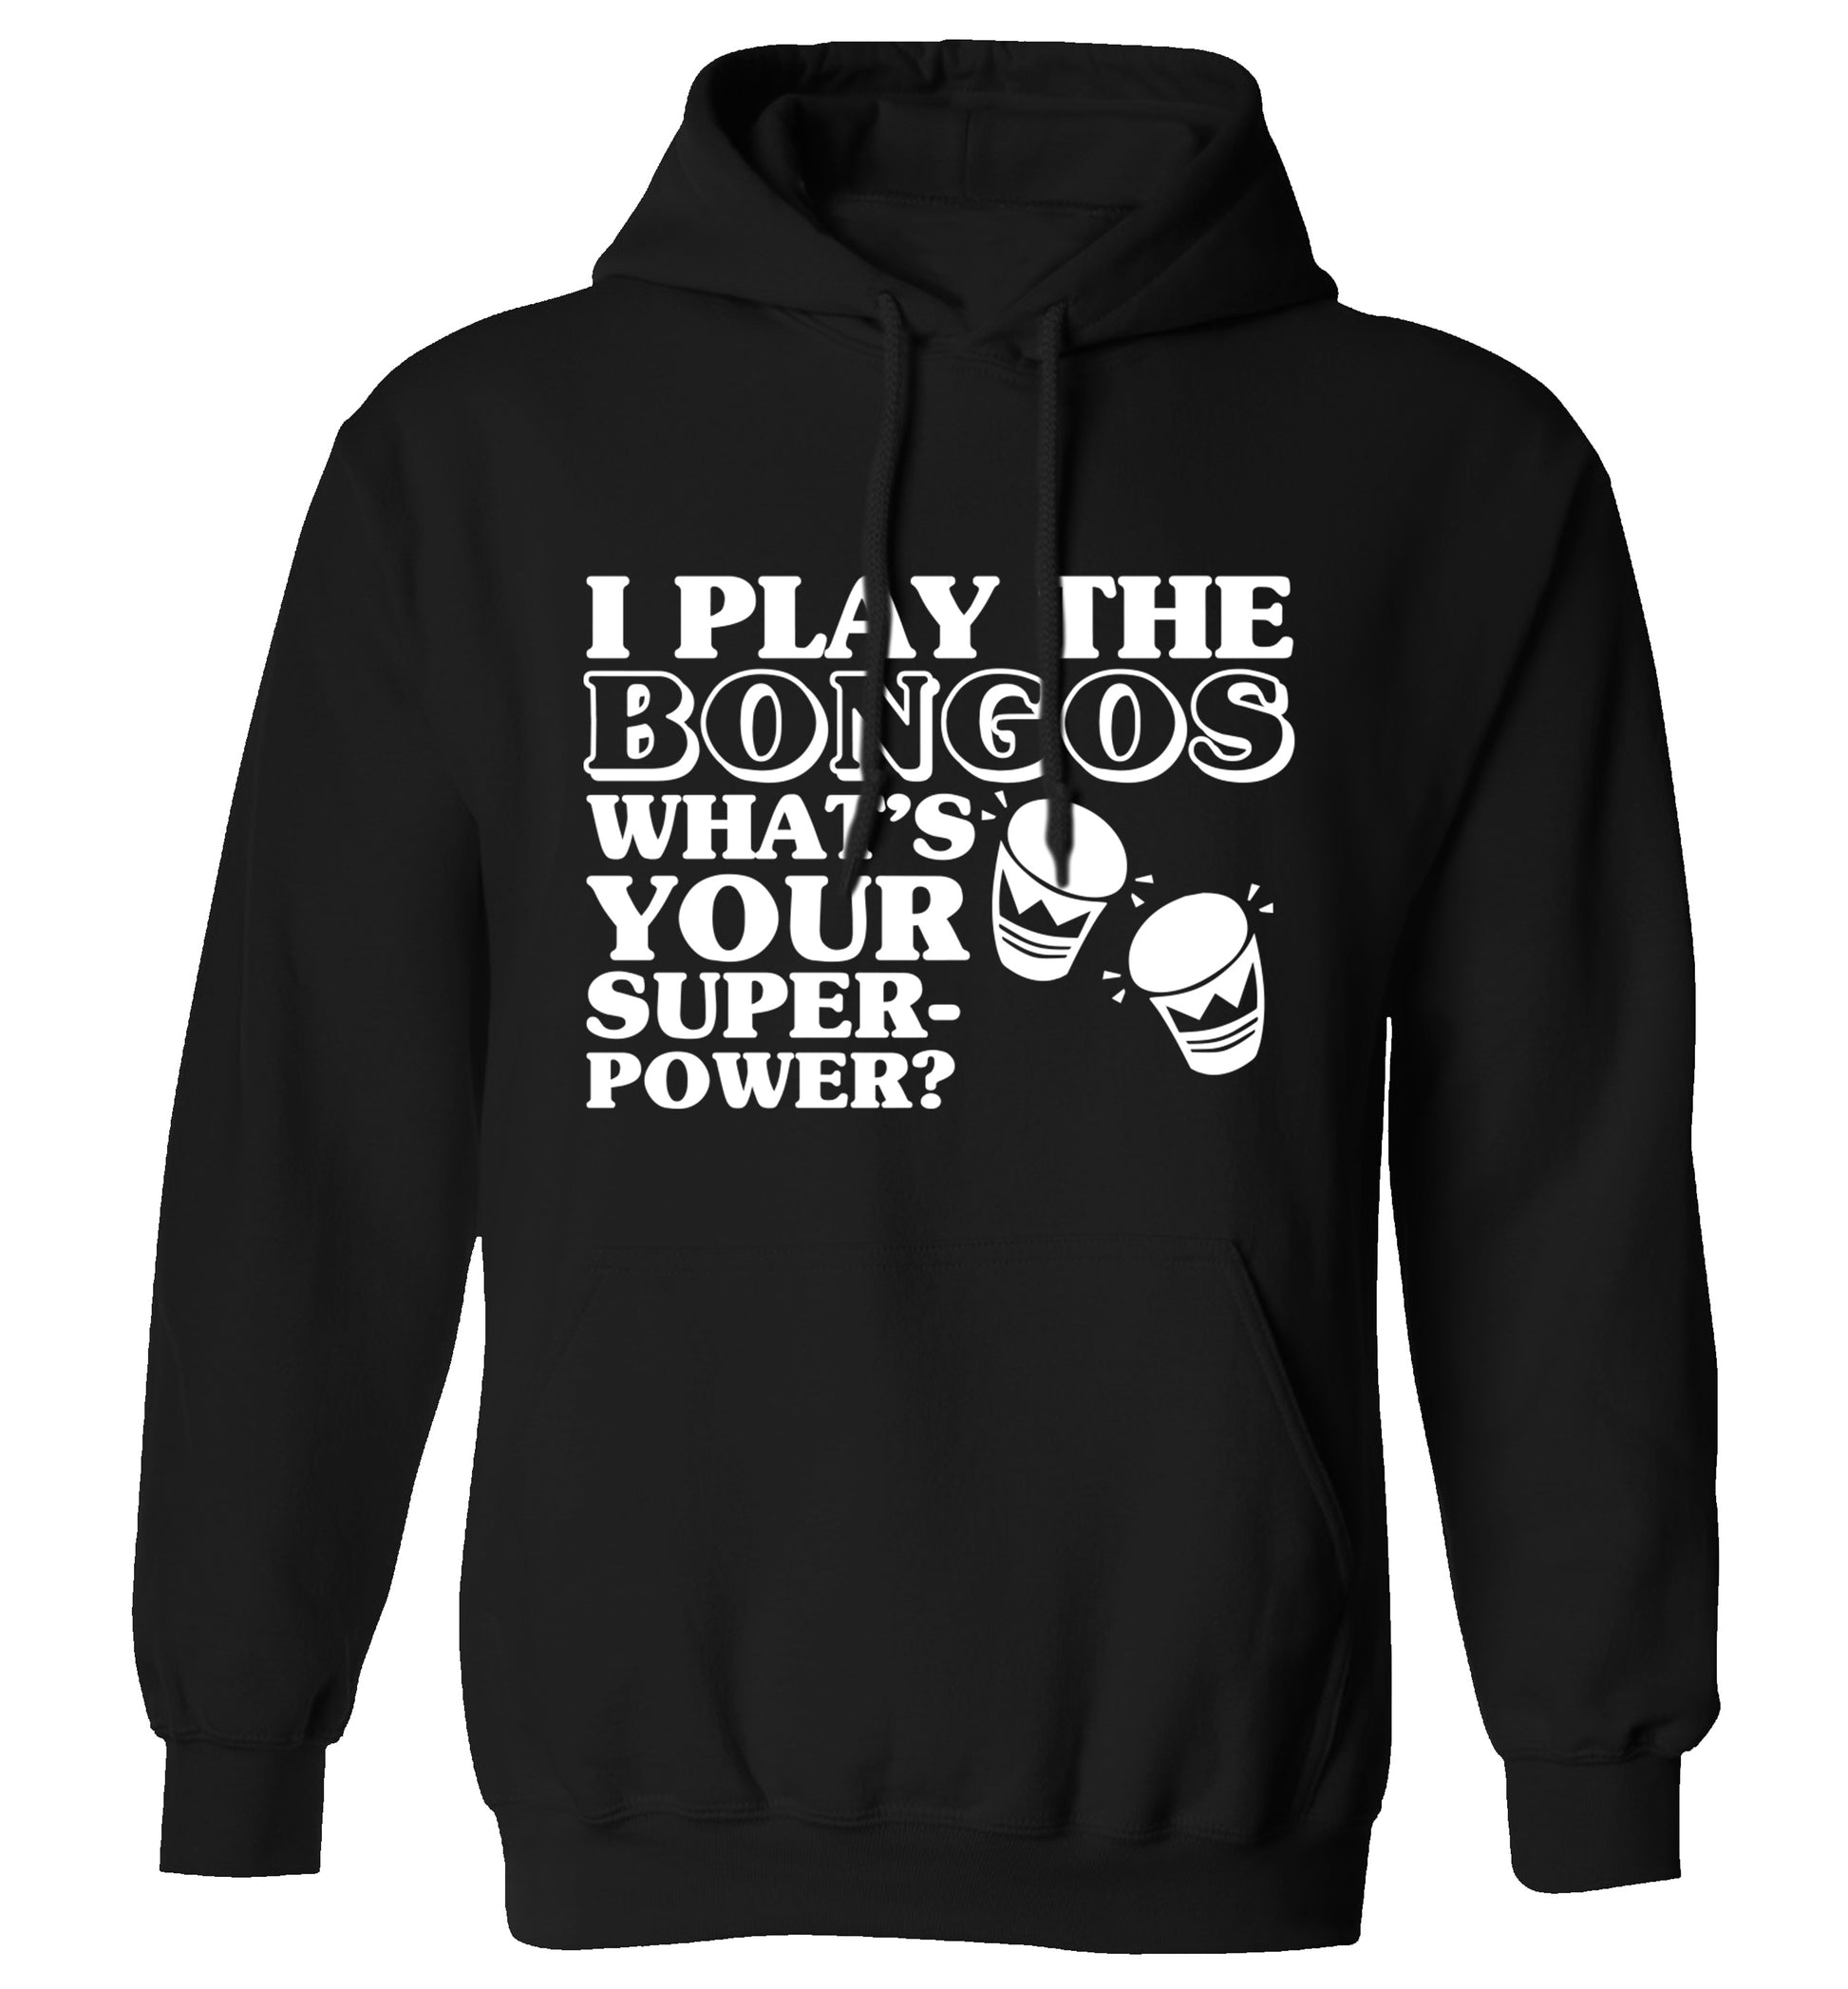 I play the bongos what's your superpower? adults unisexblack hoodie 2XL